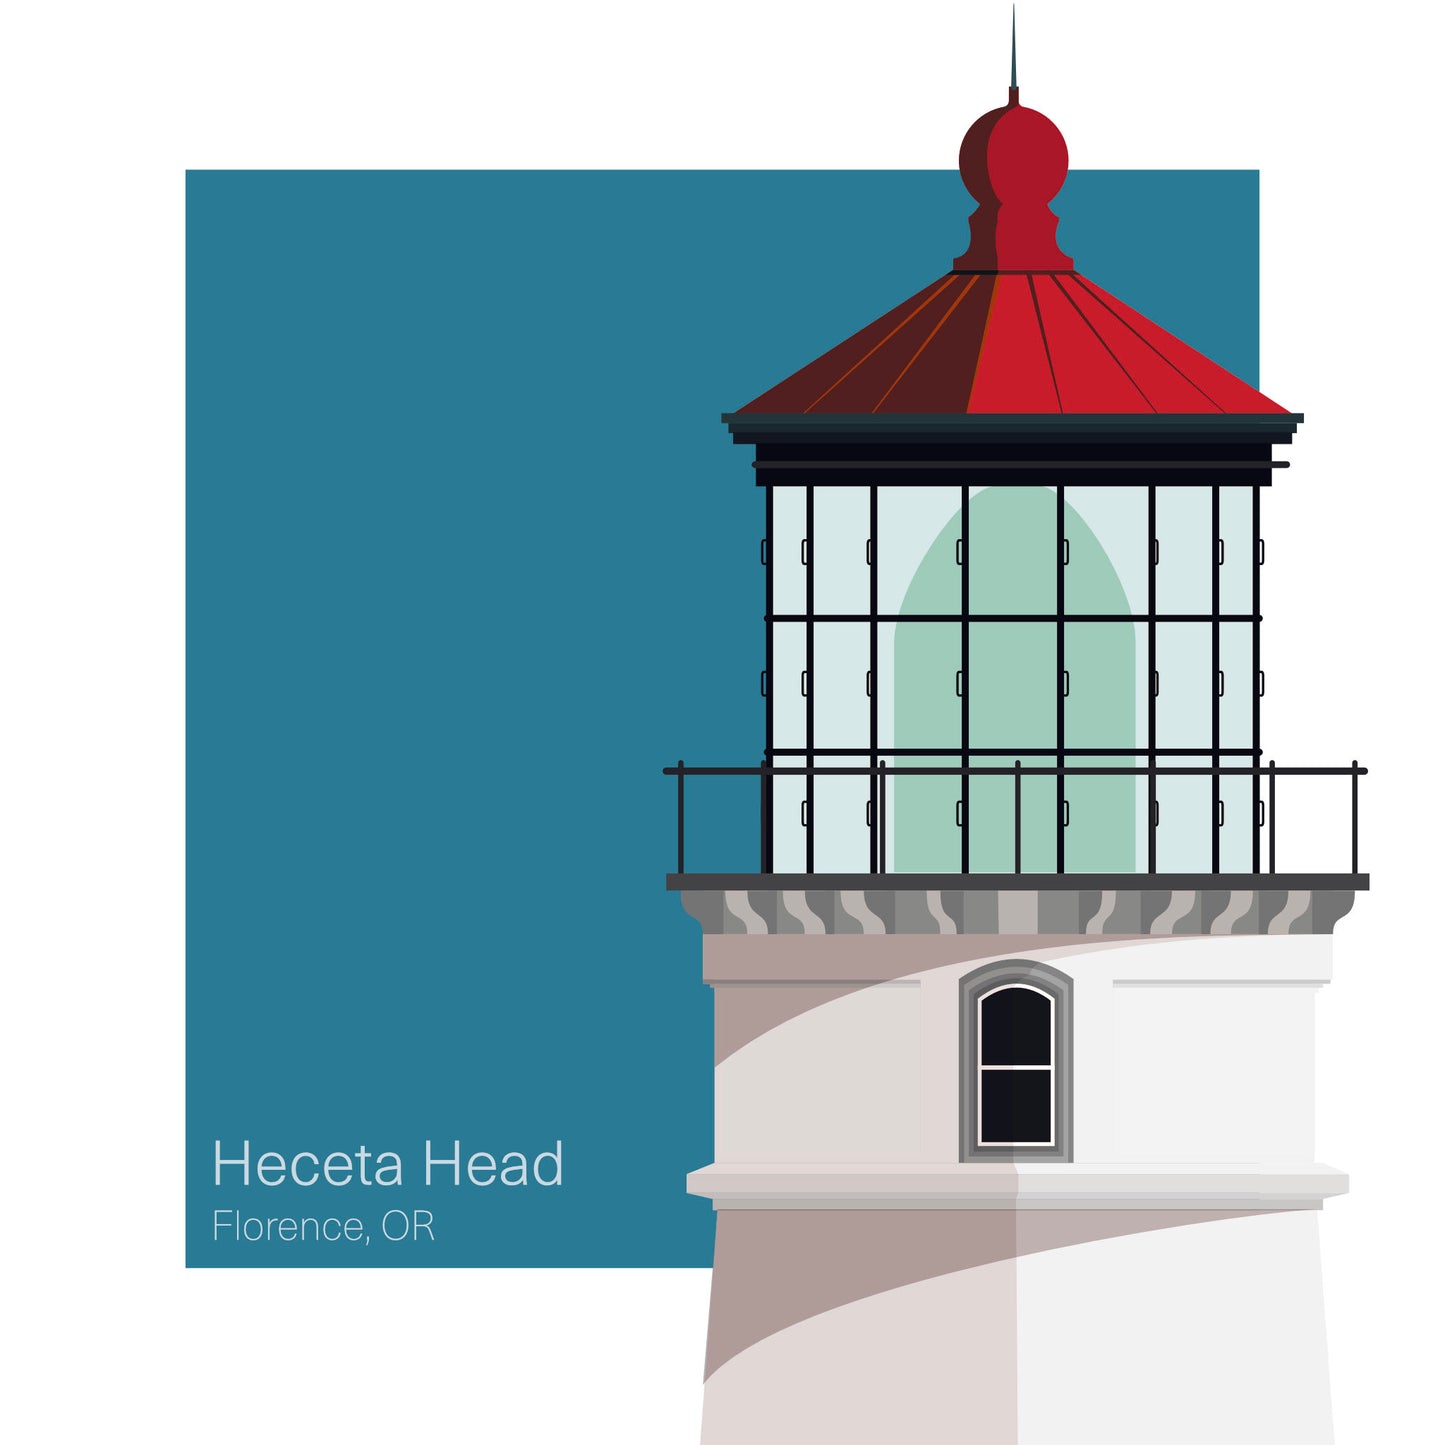 Illustration of the Heceta Head lighthouse, OR, USA. On a white background with aqua blue square as a backdrop.